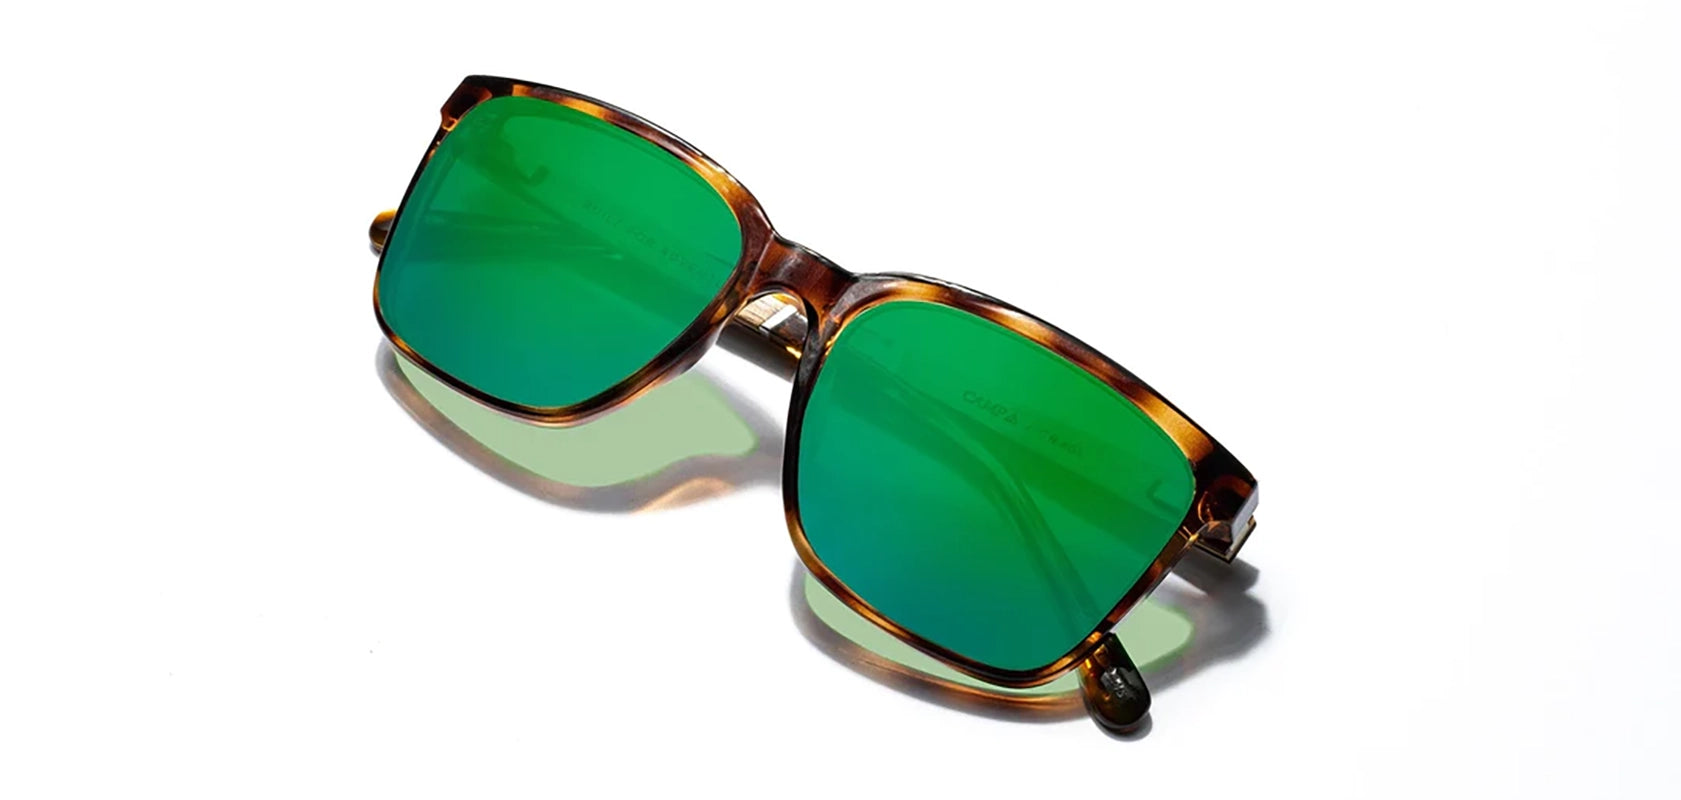 Camp Crag Sunglasses in Tortoise with walnut frames, HD + Green flash Polarized lenses, front angled closed temple view